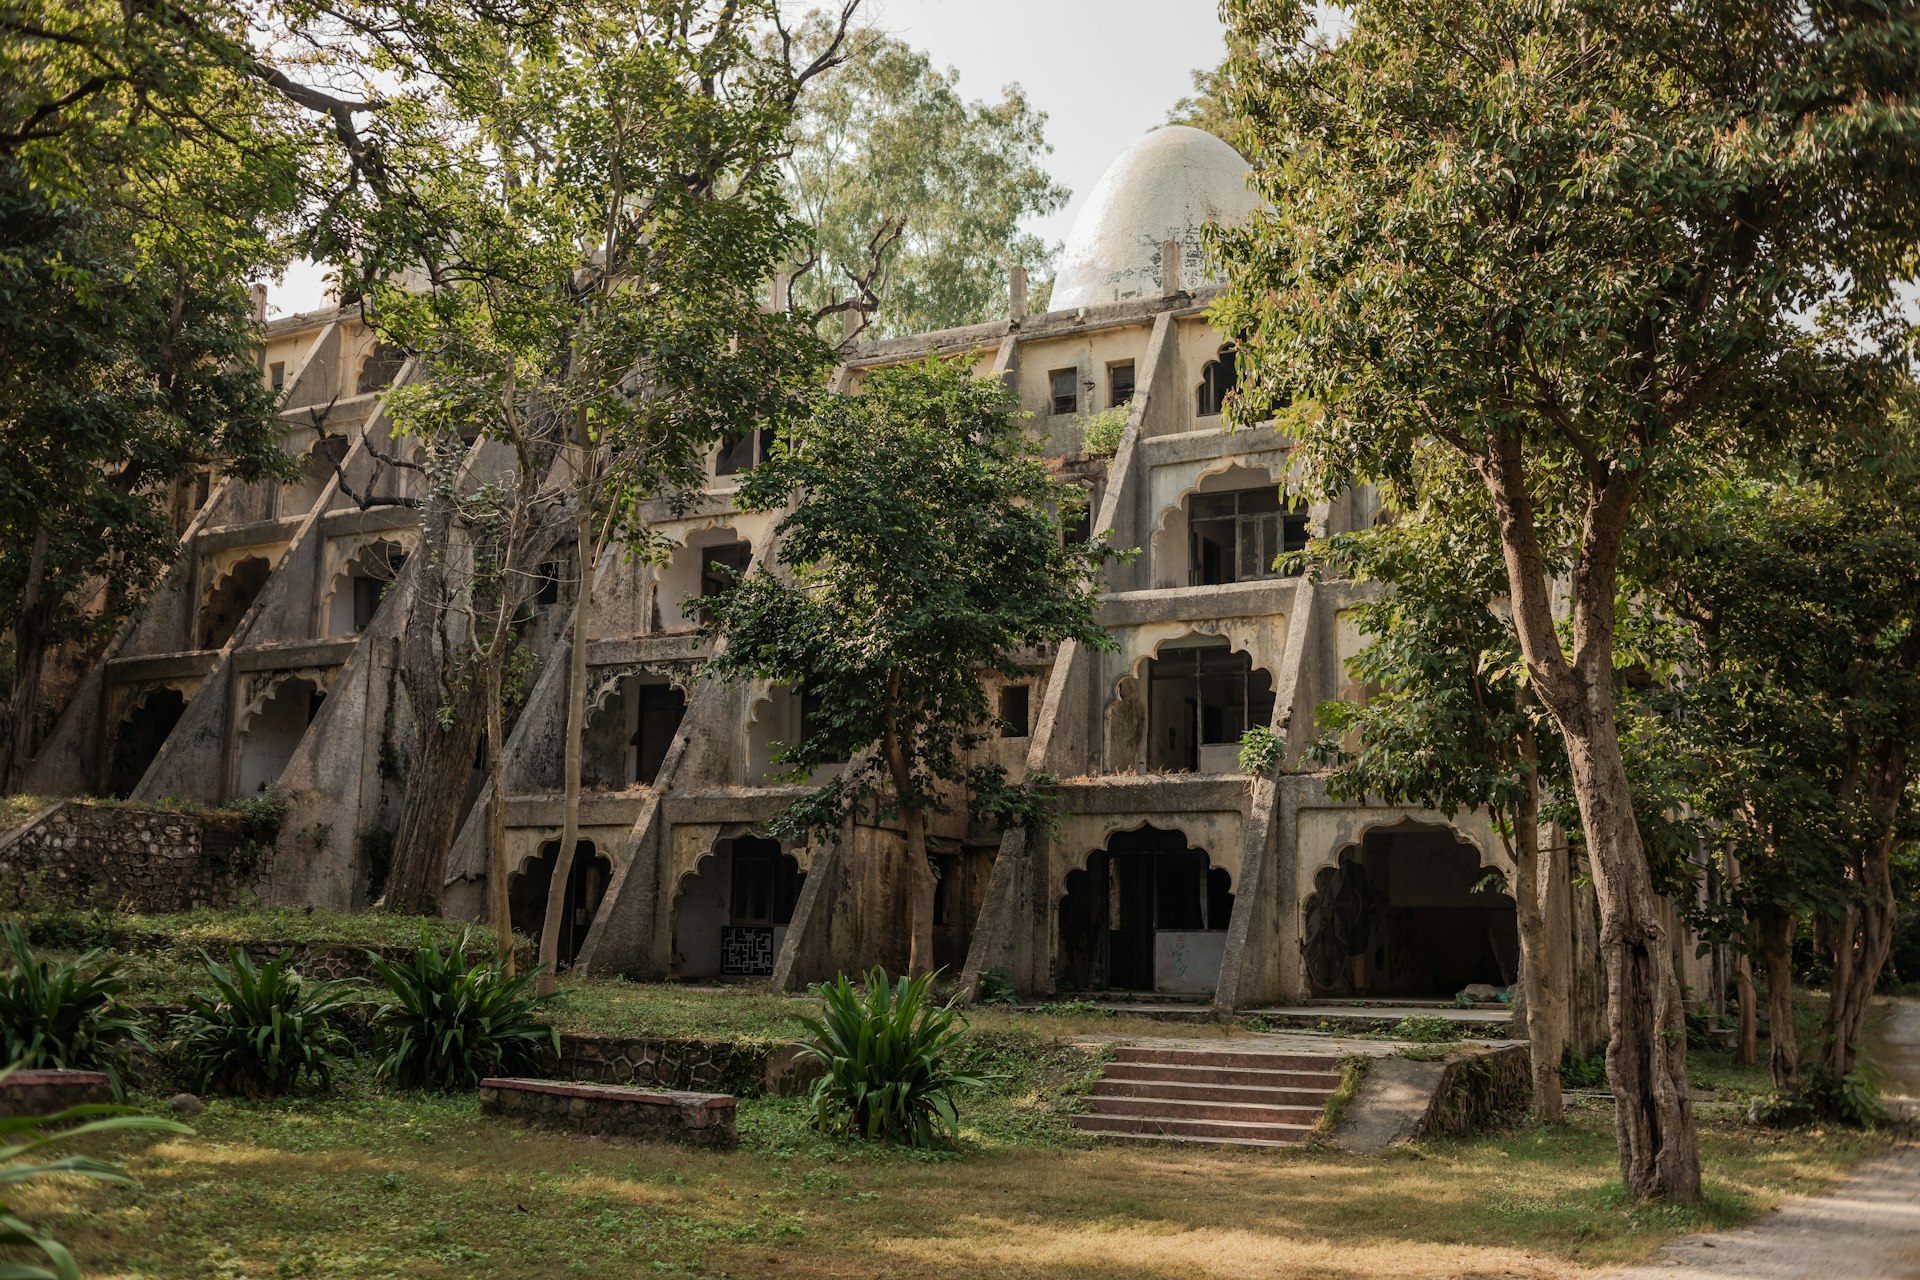 An ashram building surrounded by thick trees